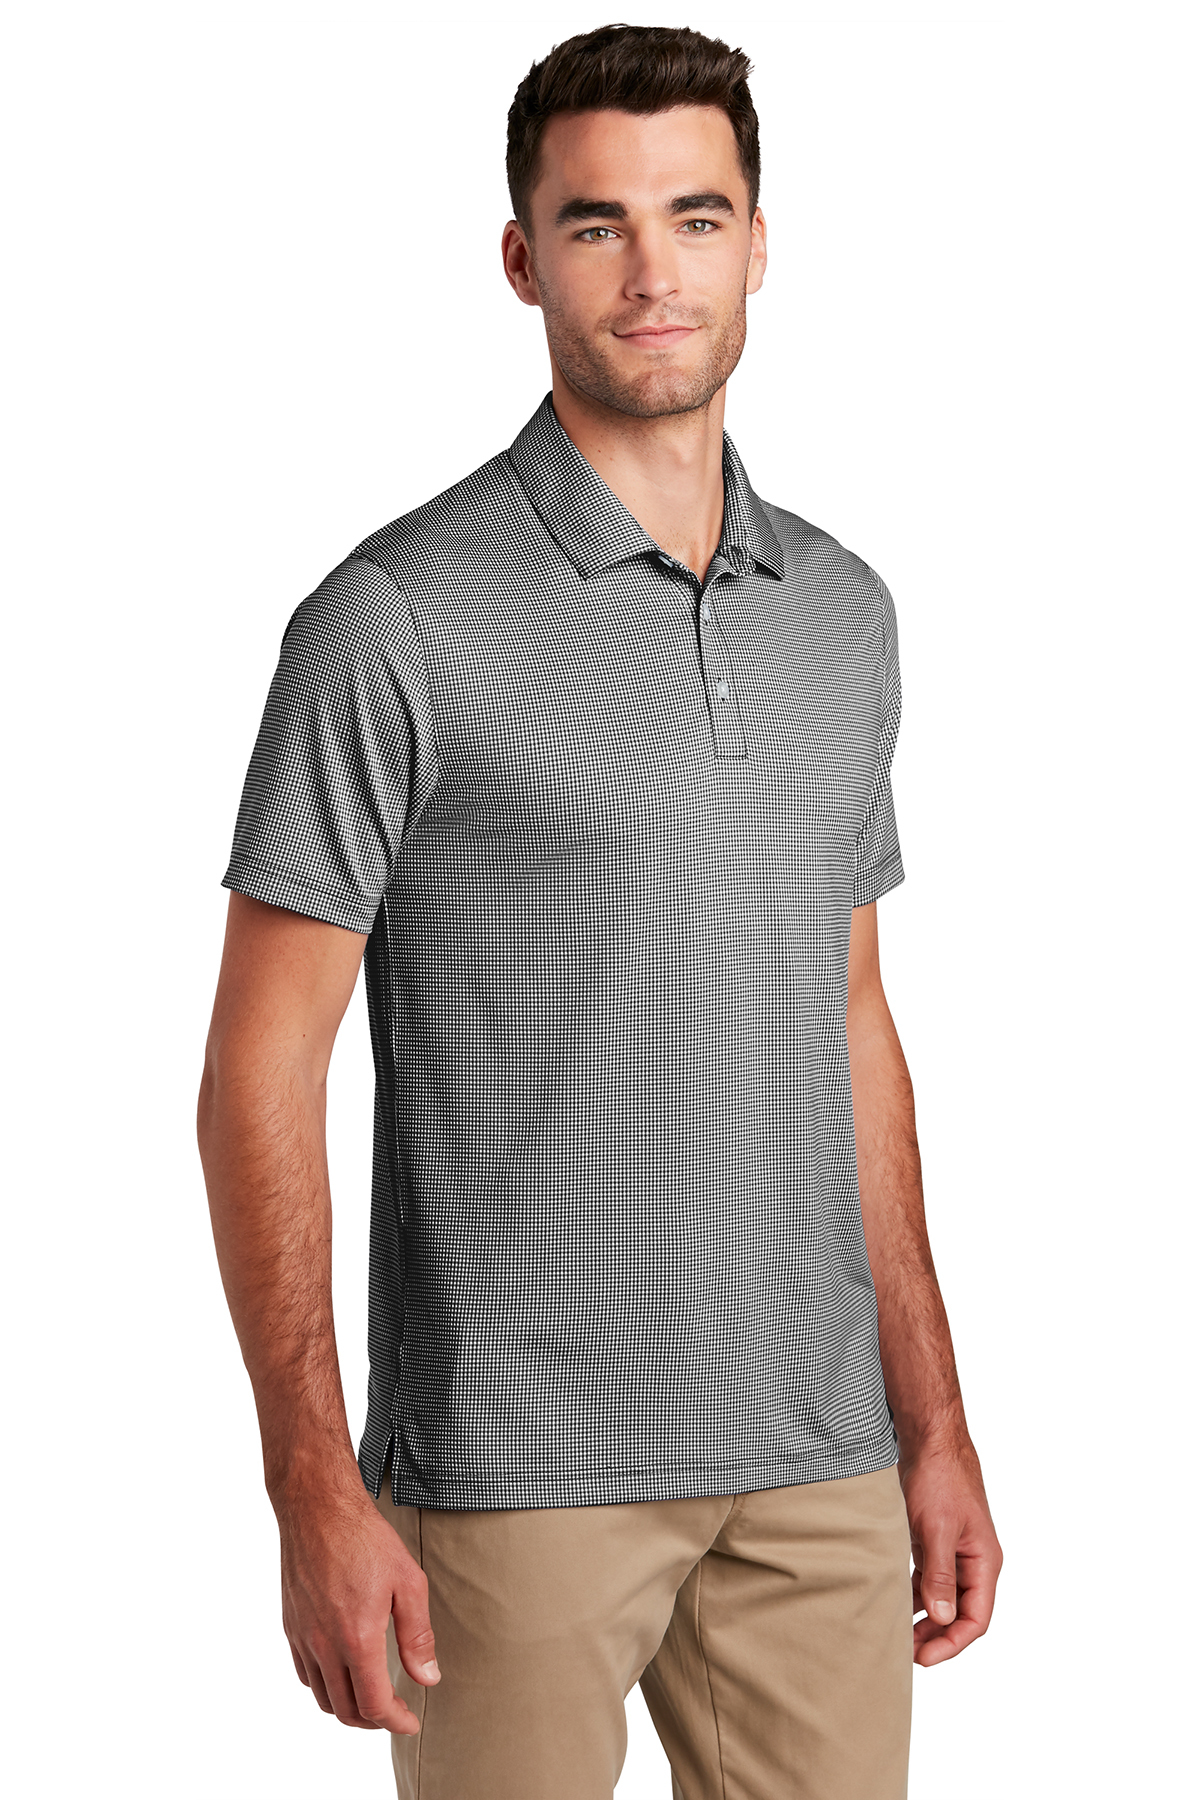 Port Authority Gingham Polo | Product | SanMar